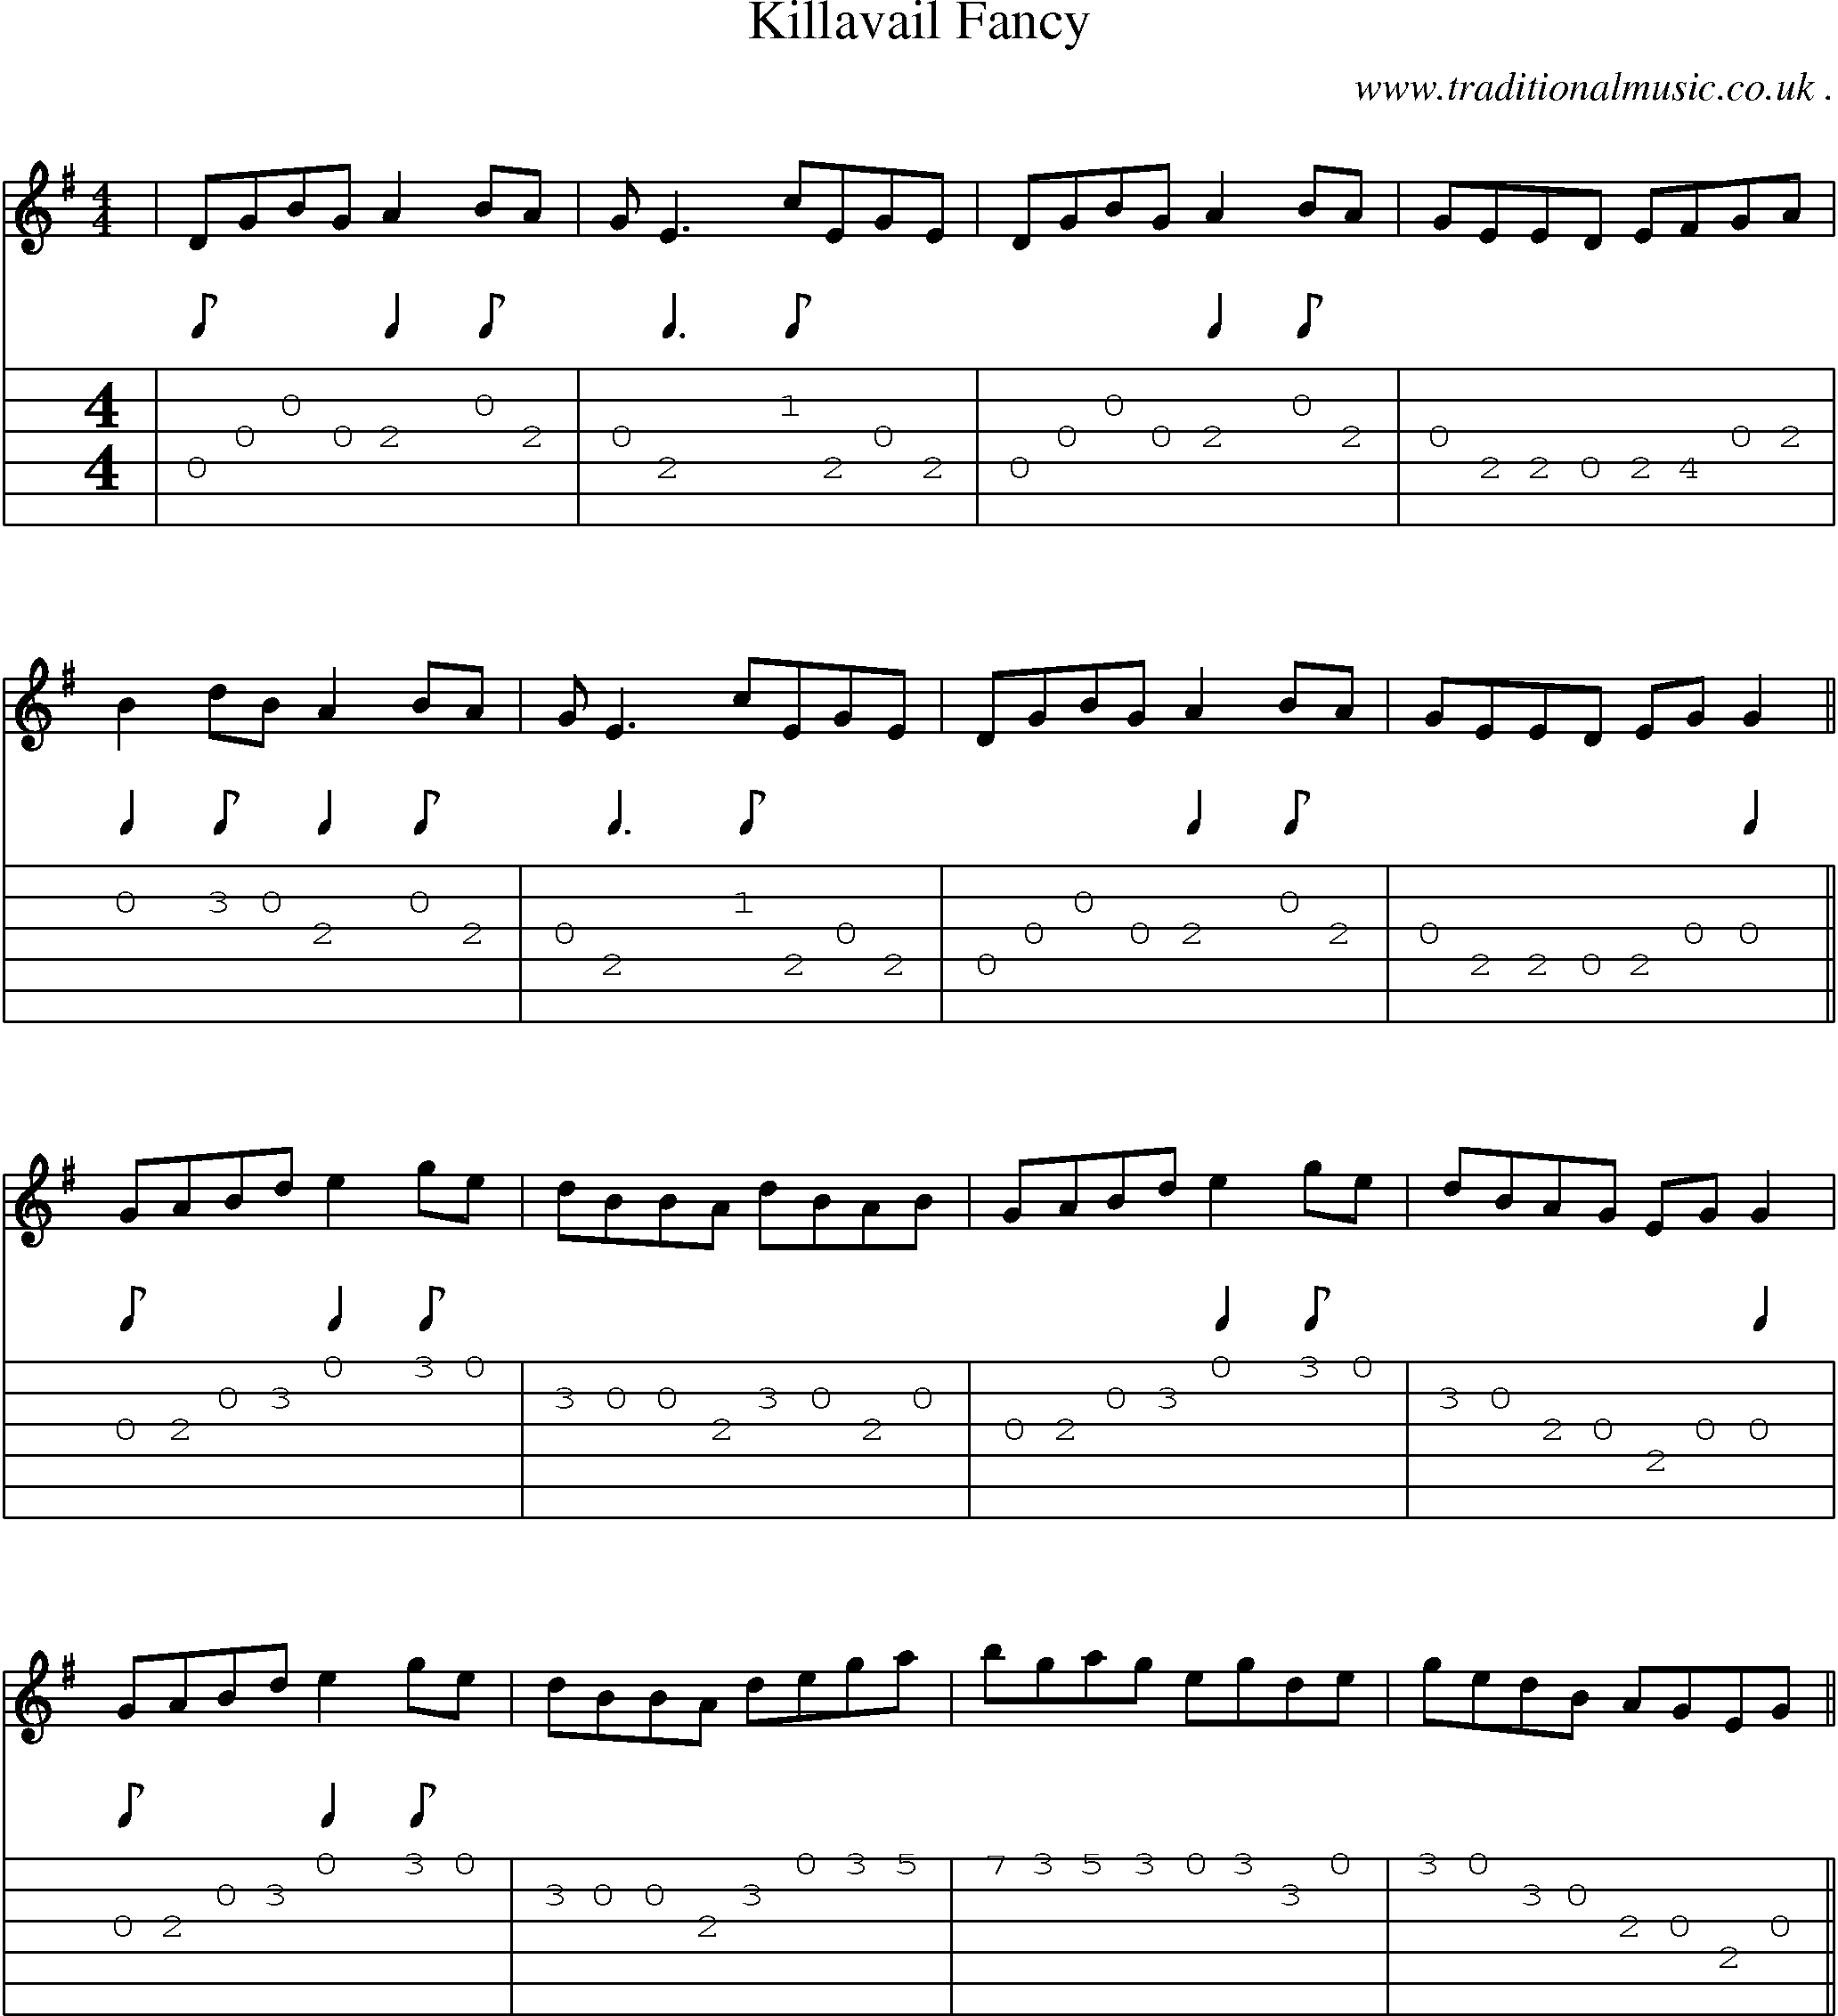 Sheet-Music and Guitar Tabs for Killavail Fancy